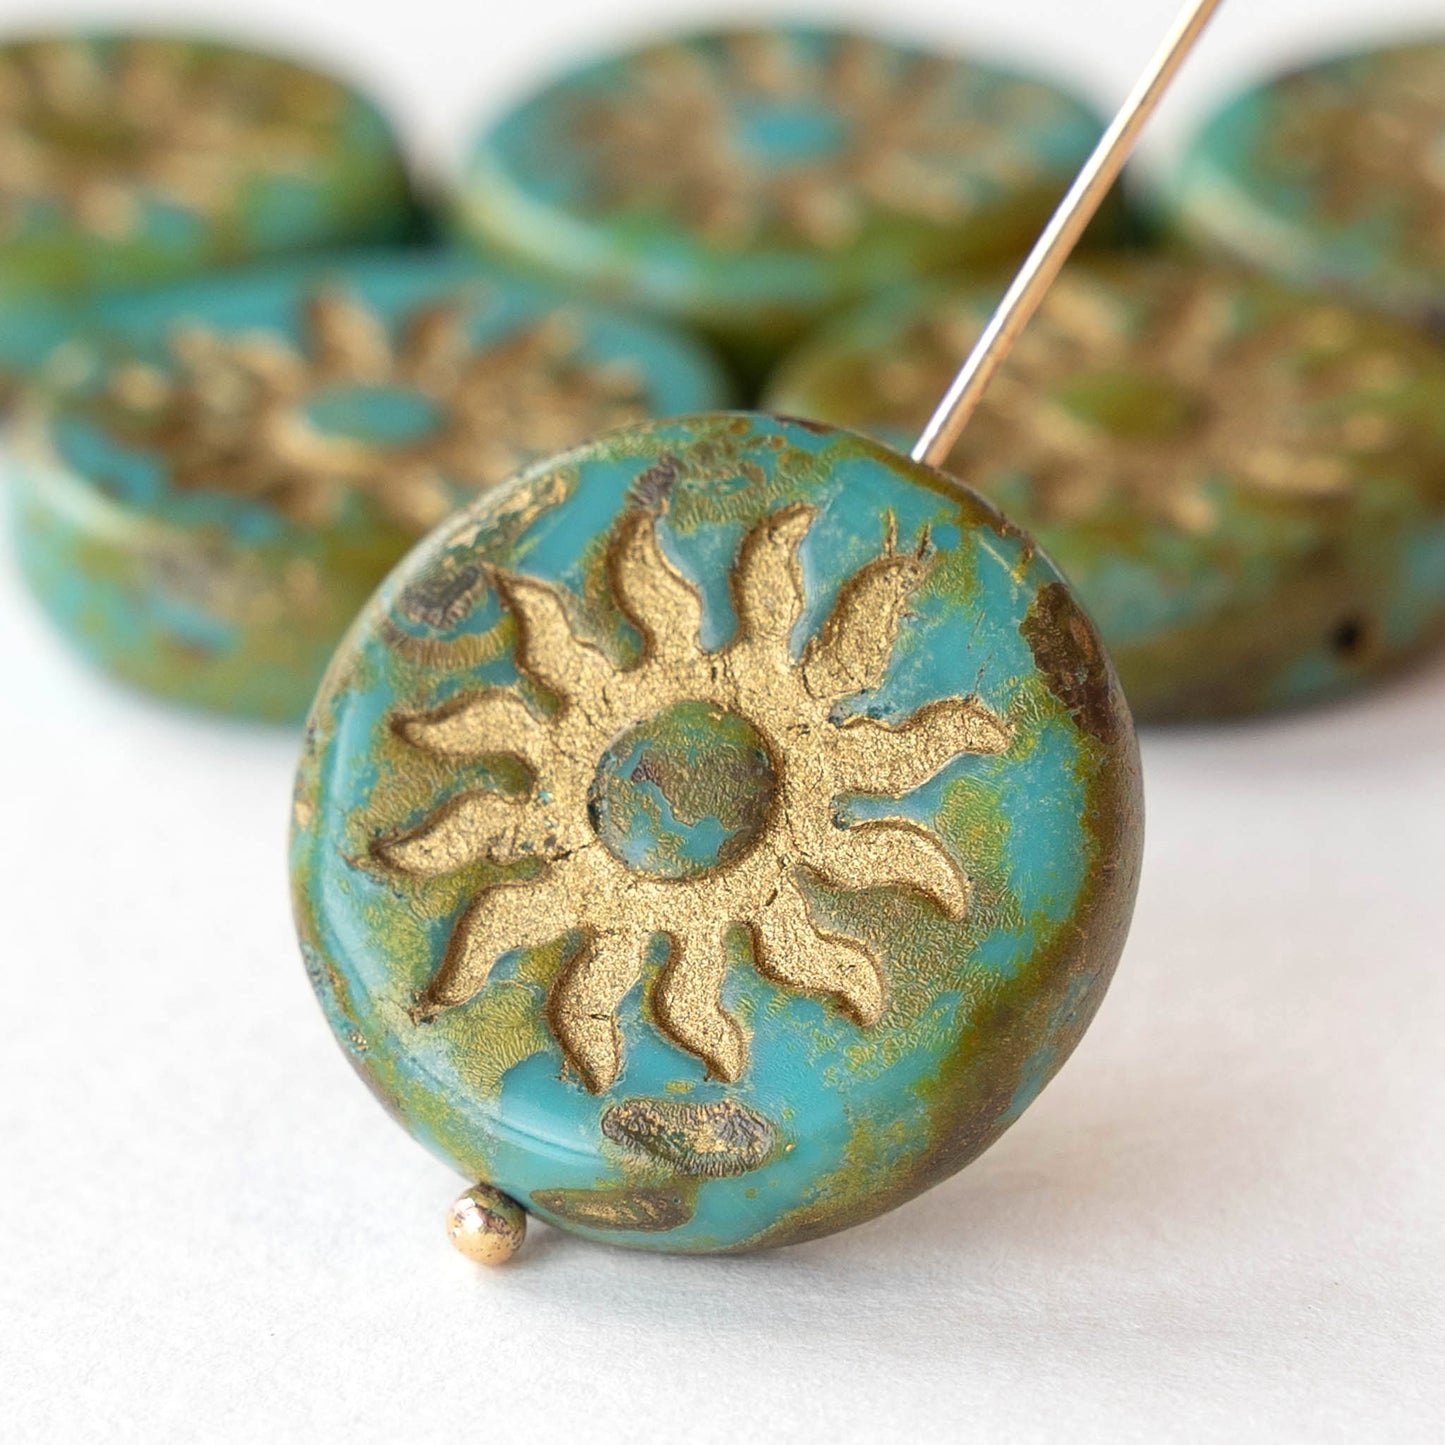 22mm Sun Coin Beads - Opaque Turquoise Picasso - 1 Bead